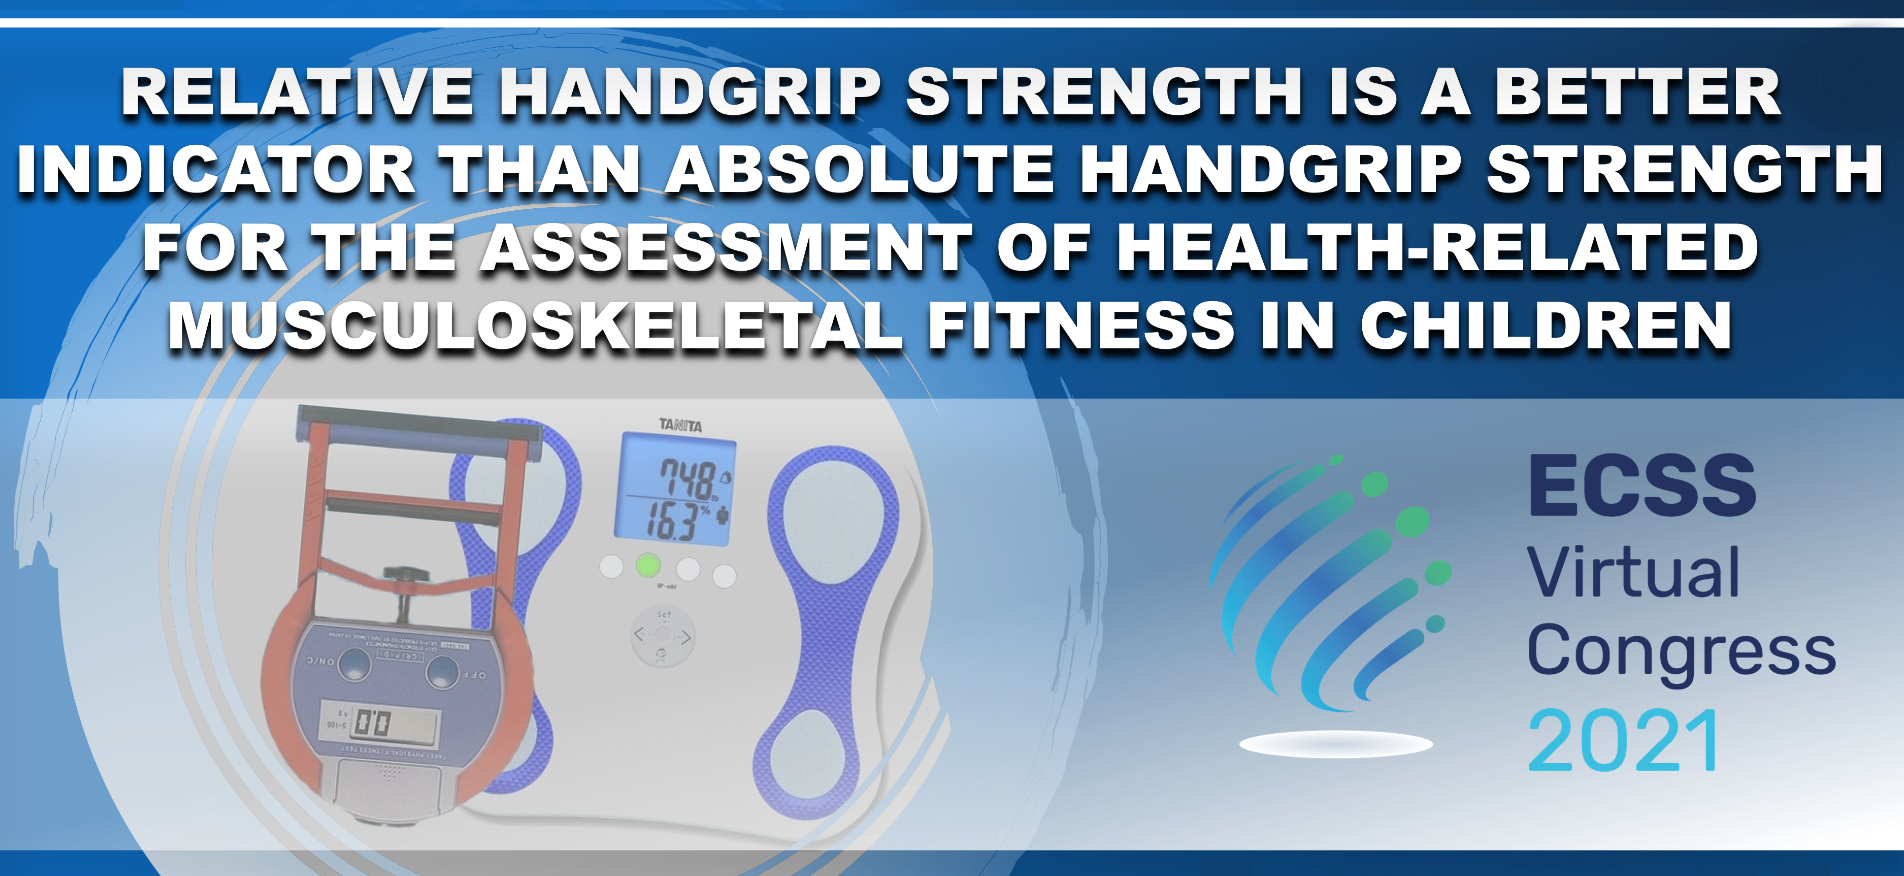 Relative handgrip strength is a better indicator than absolute handgrip strength for the assessment of health-related musculoskeletal fitness in children at the ECSS Virtual Congress 2021